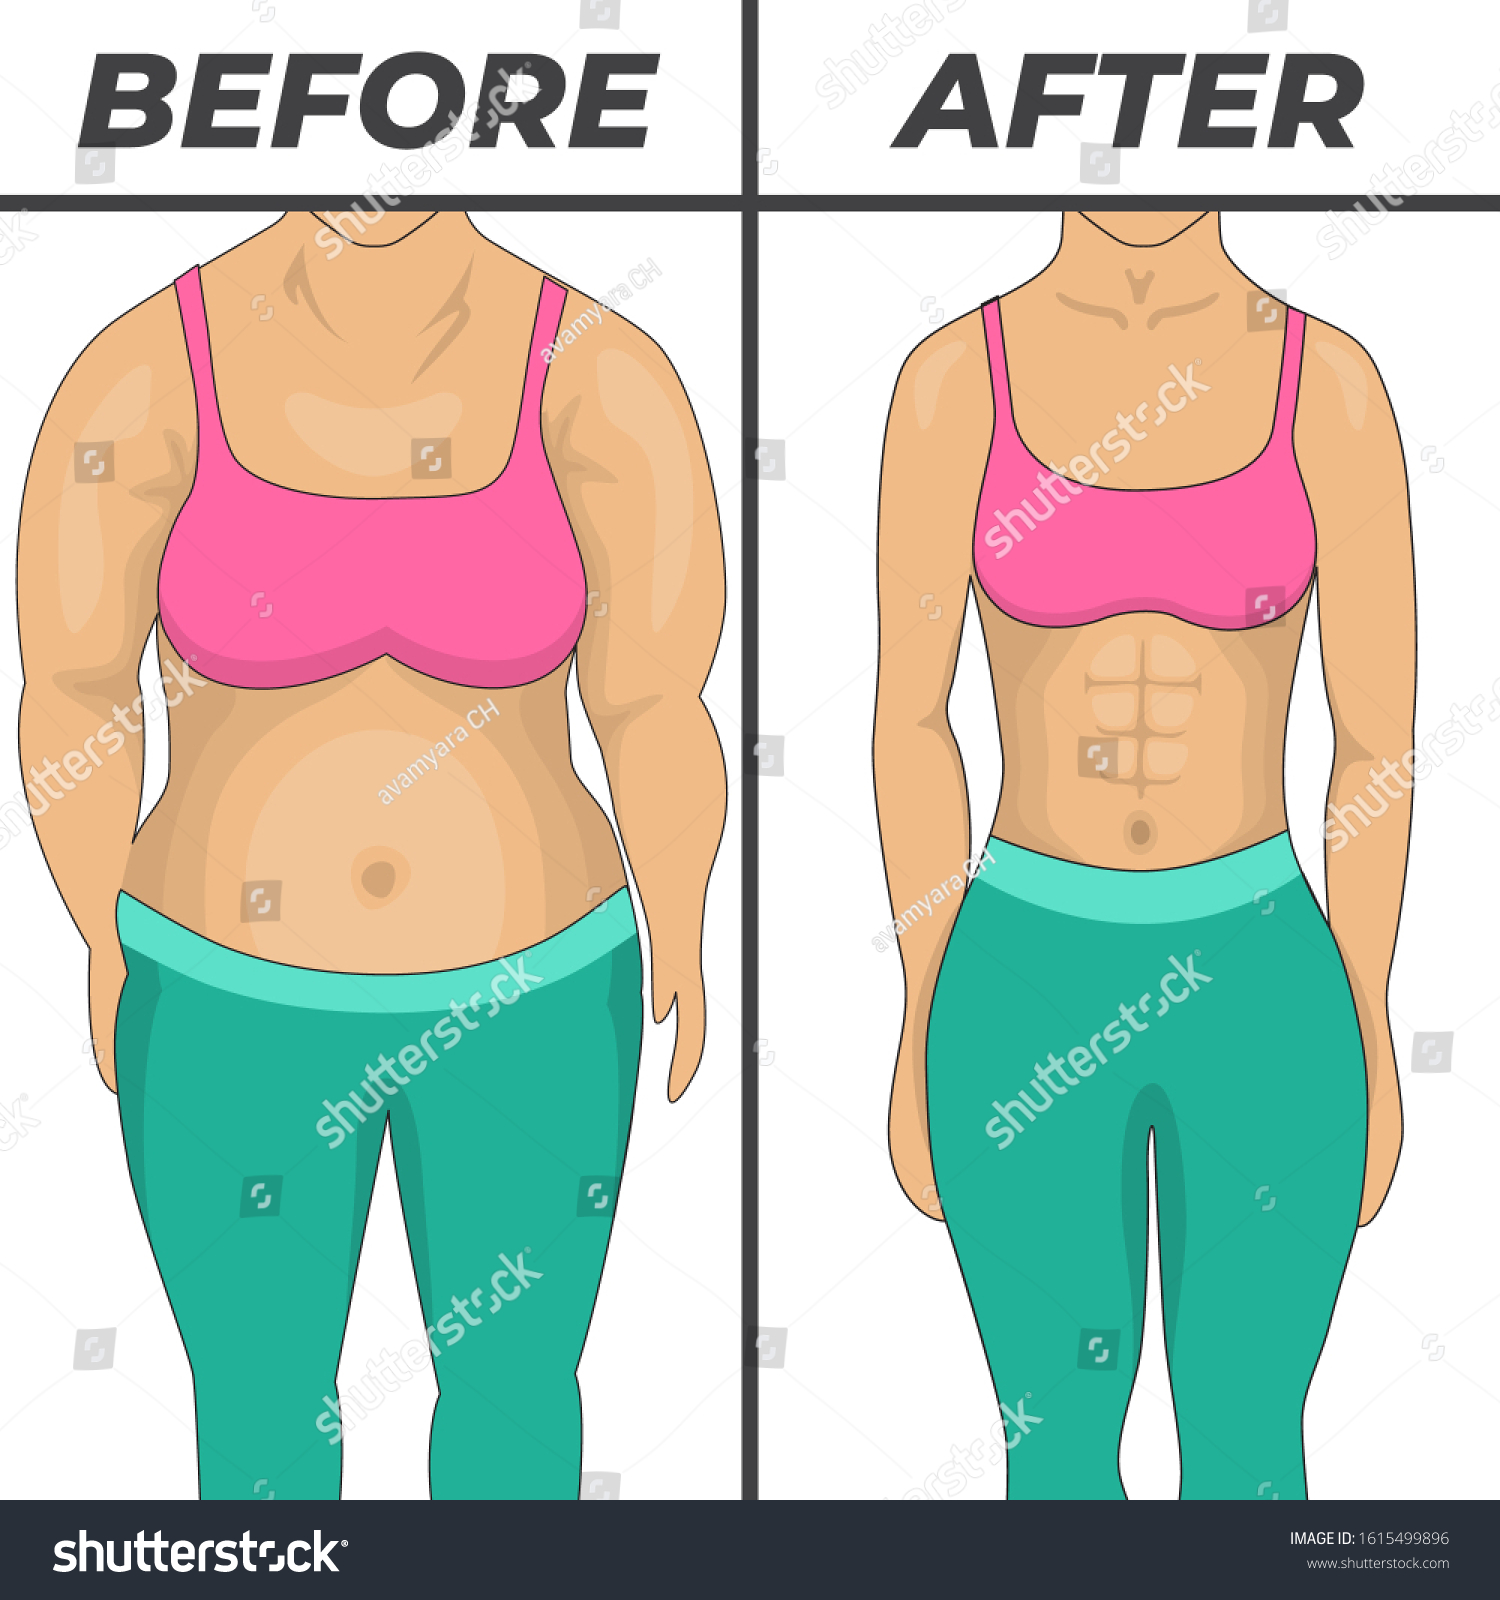 Weigh Loss Concept Design Before After Stock-vektor (royalty